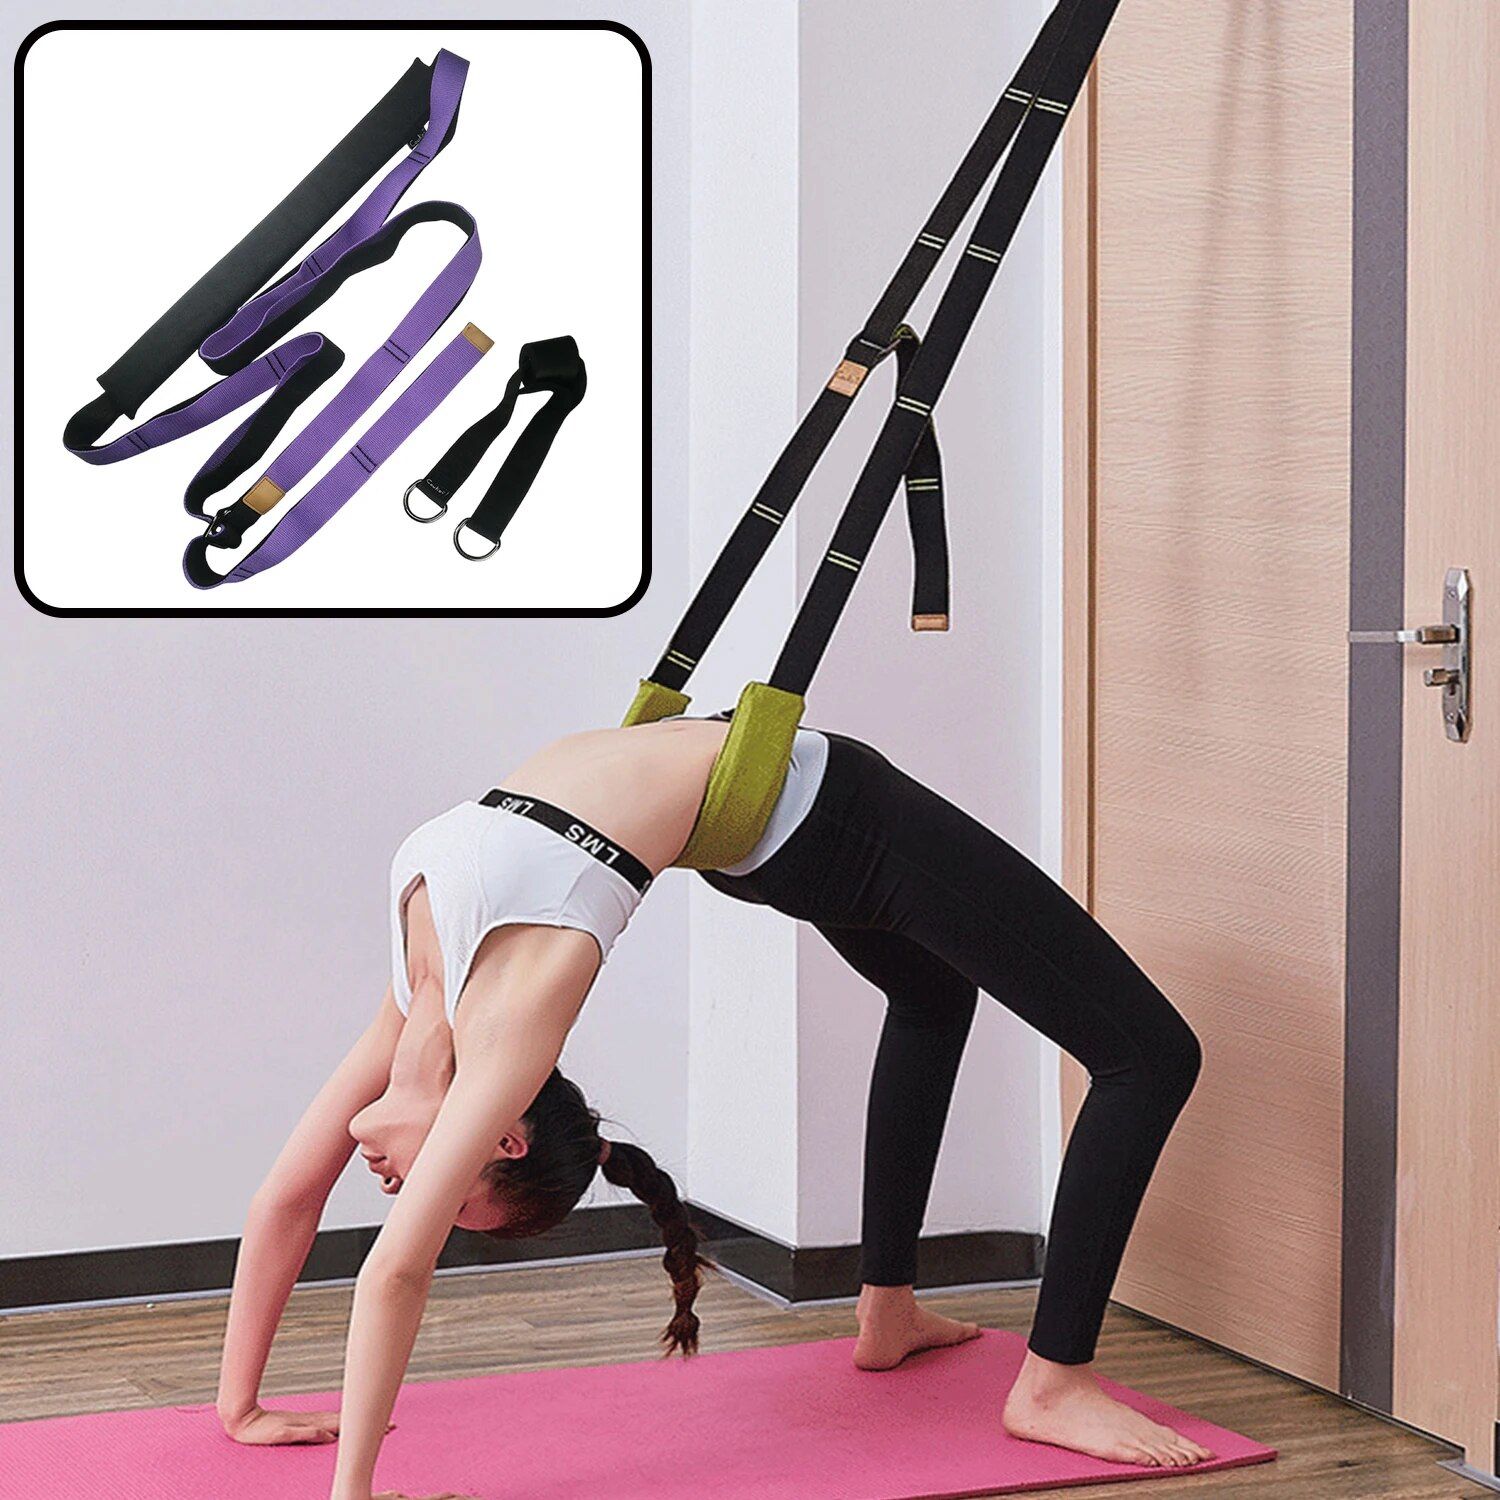 Multi-Purpose Yoga Stretch Strap for Fitness, Ballet, and Gymnastics - Polyester Cotton 